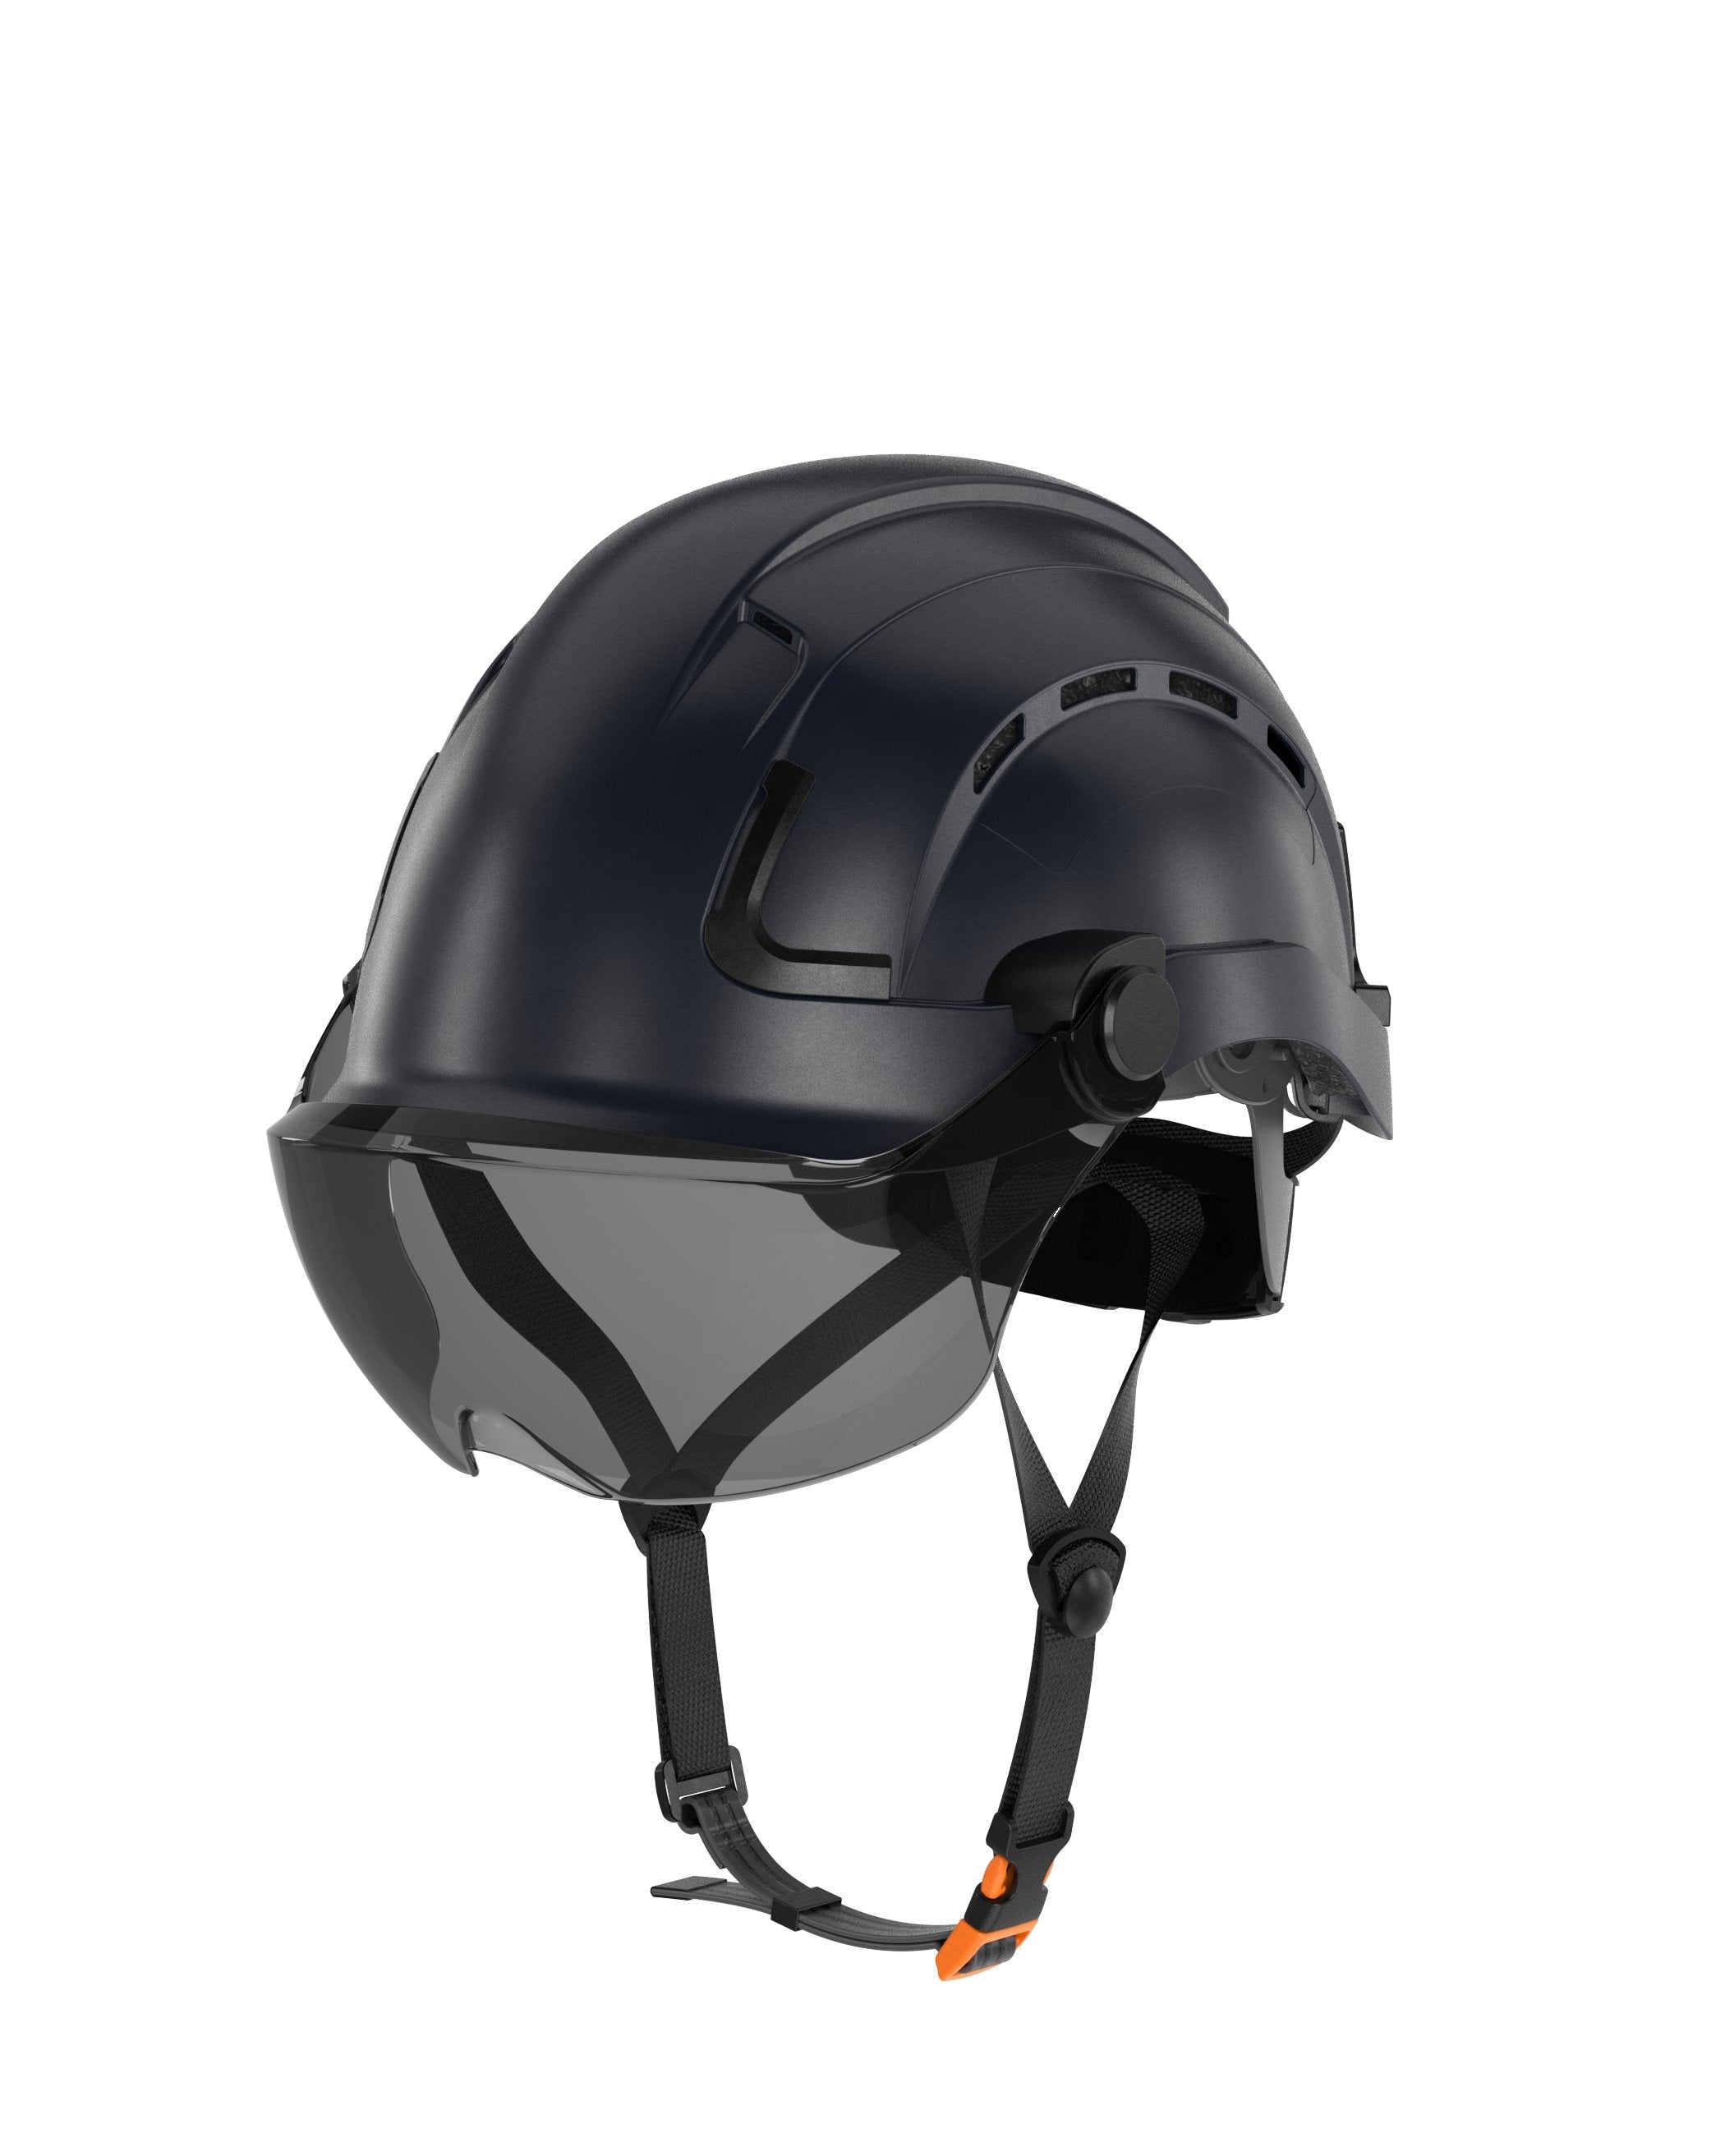 H2-CHV Safety Helmet w/ TINTED Visor Type 2 Class C, ANSI Z89 and EN12492  rated